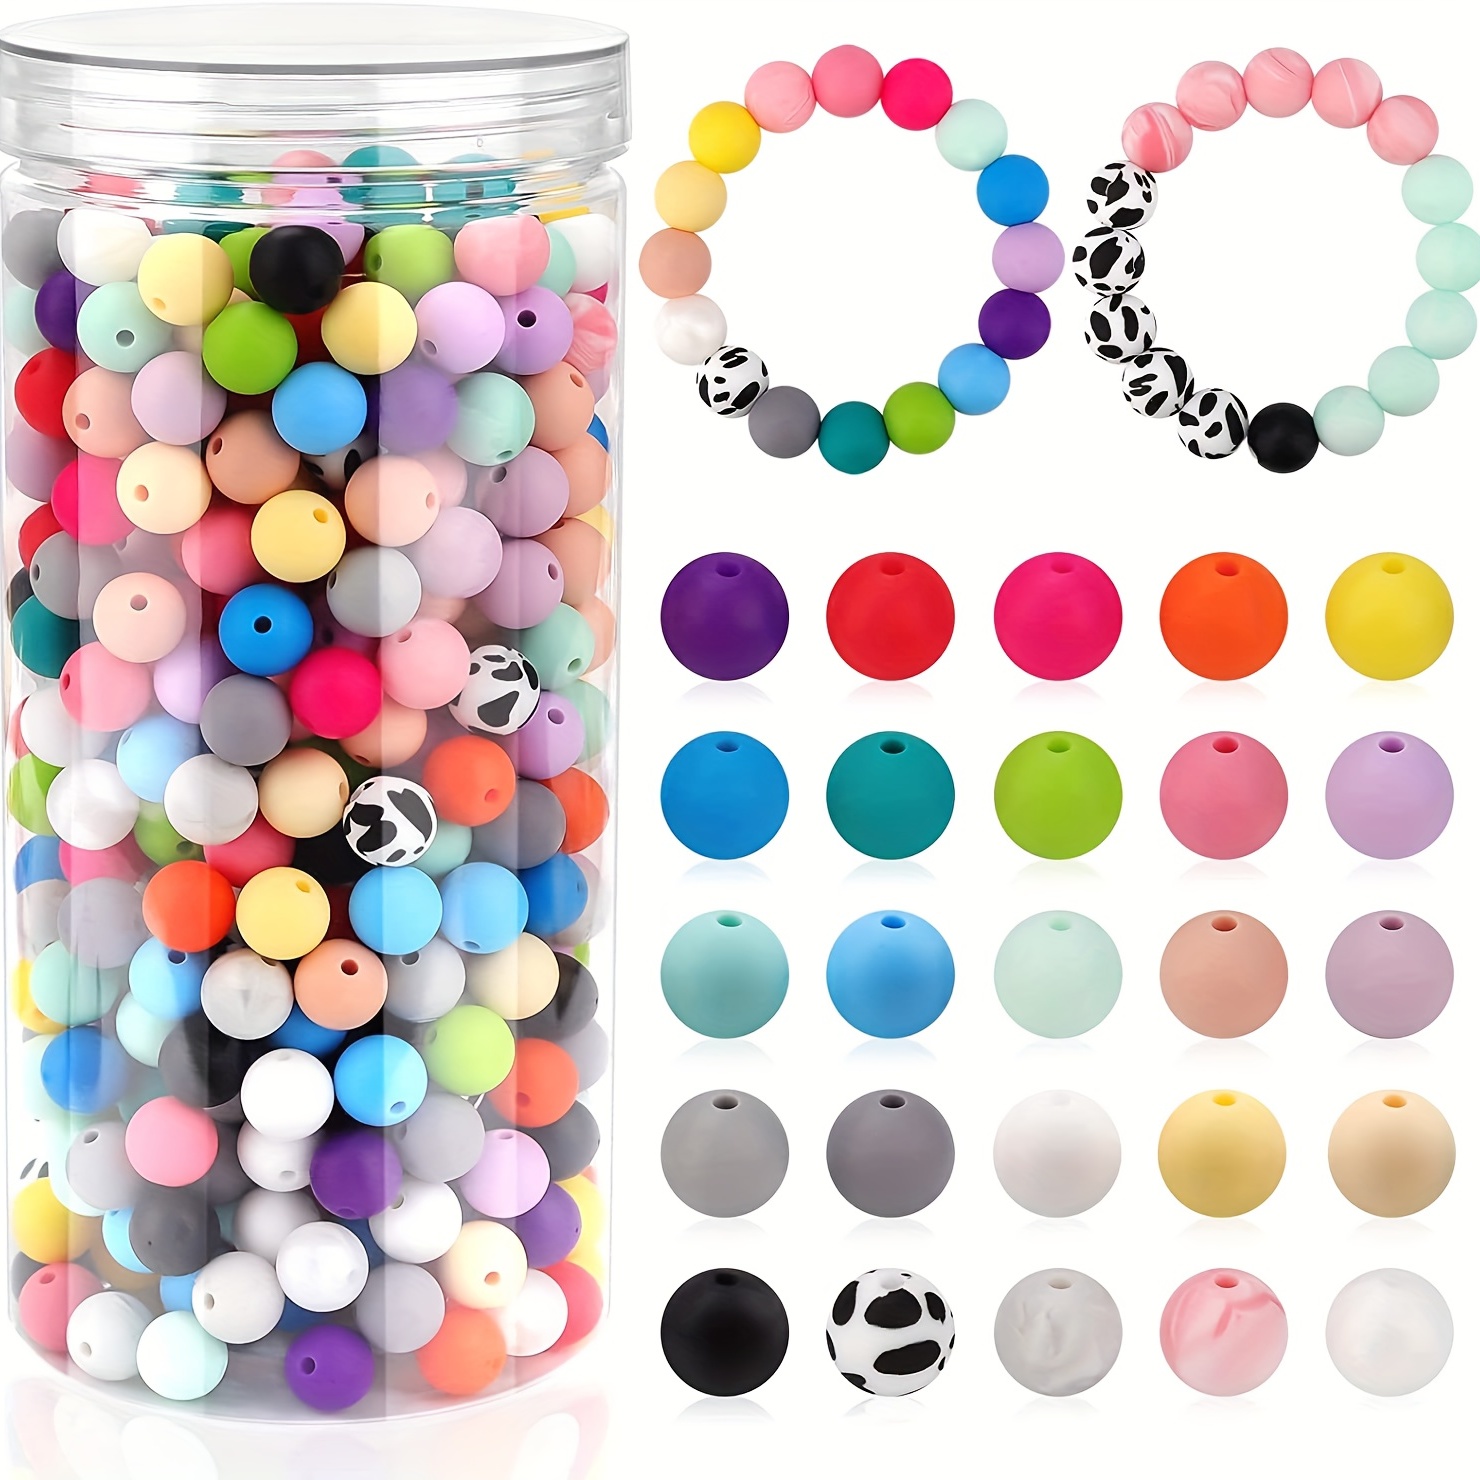 

500pcs 12mm Colorful Silicone Loose Round Beads Circular Rubber Beads Set Fashion For Accessories Box Handmade Beading Craft Supplies